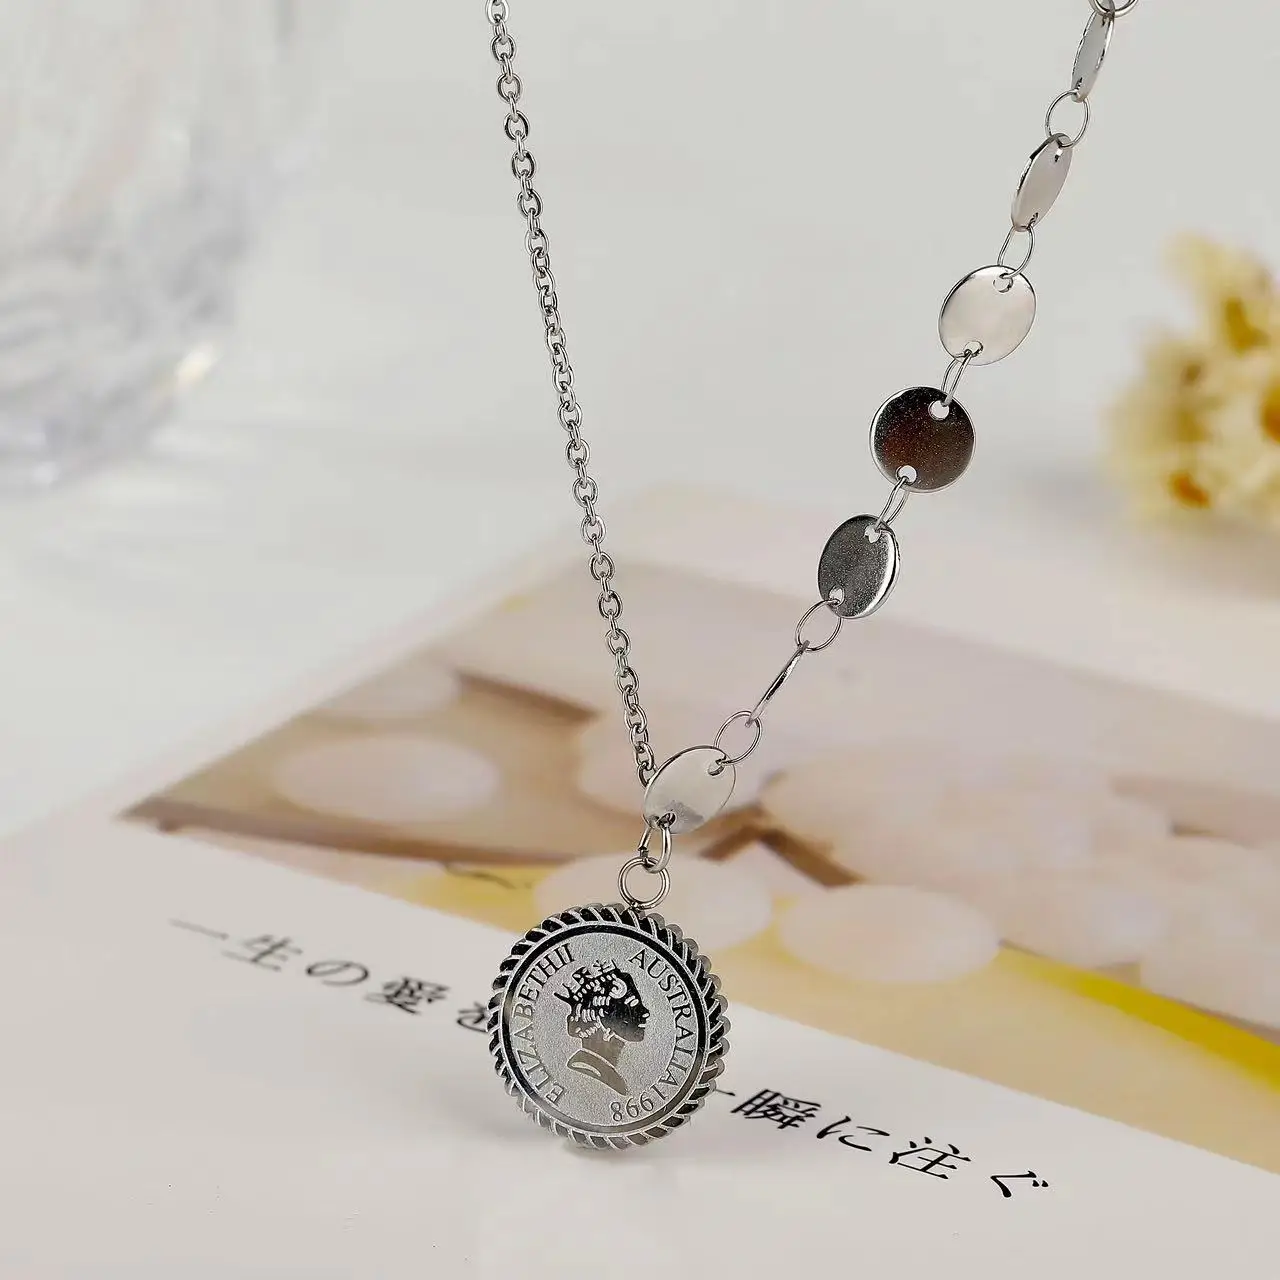 Elizabeth 1998 Australian Coin Stainless Steel Neck Chain Queen Head Girl Gift Woman Pendant Necklace